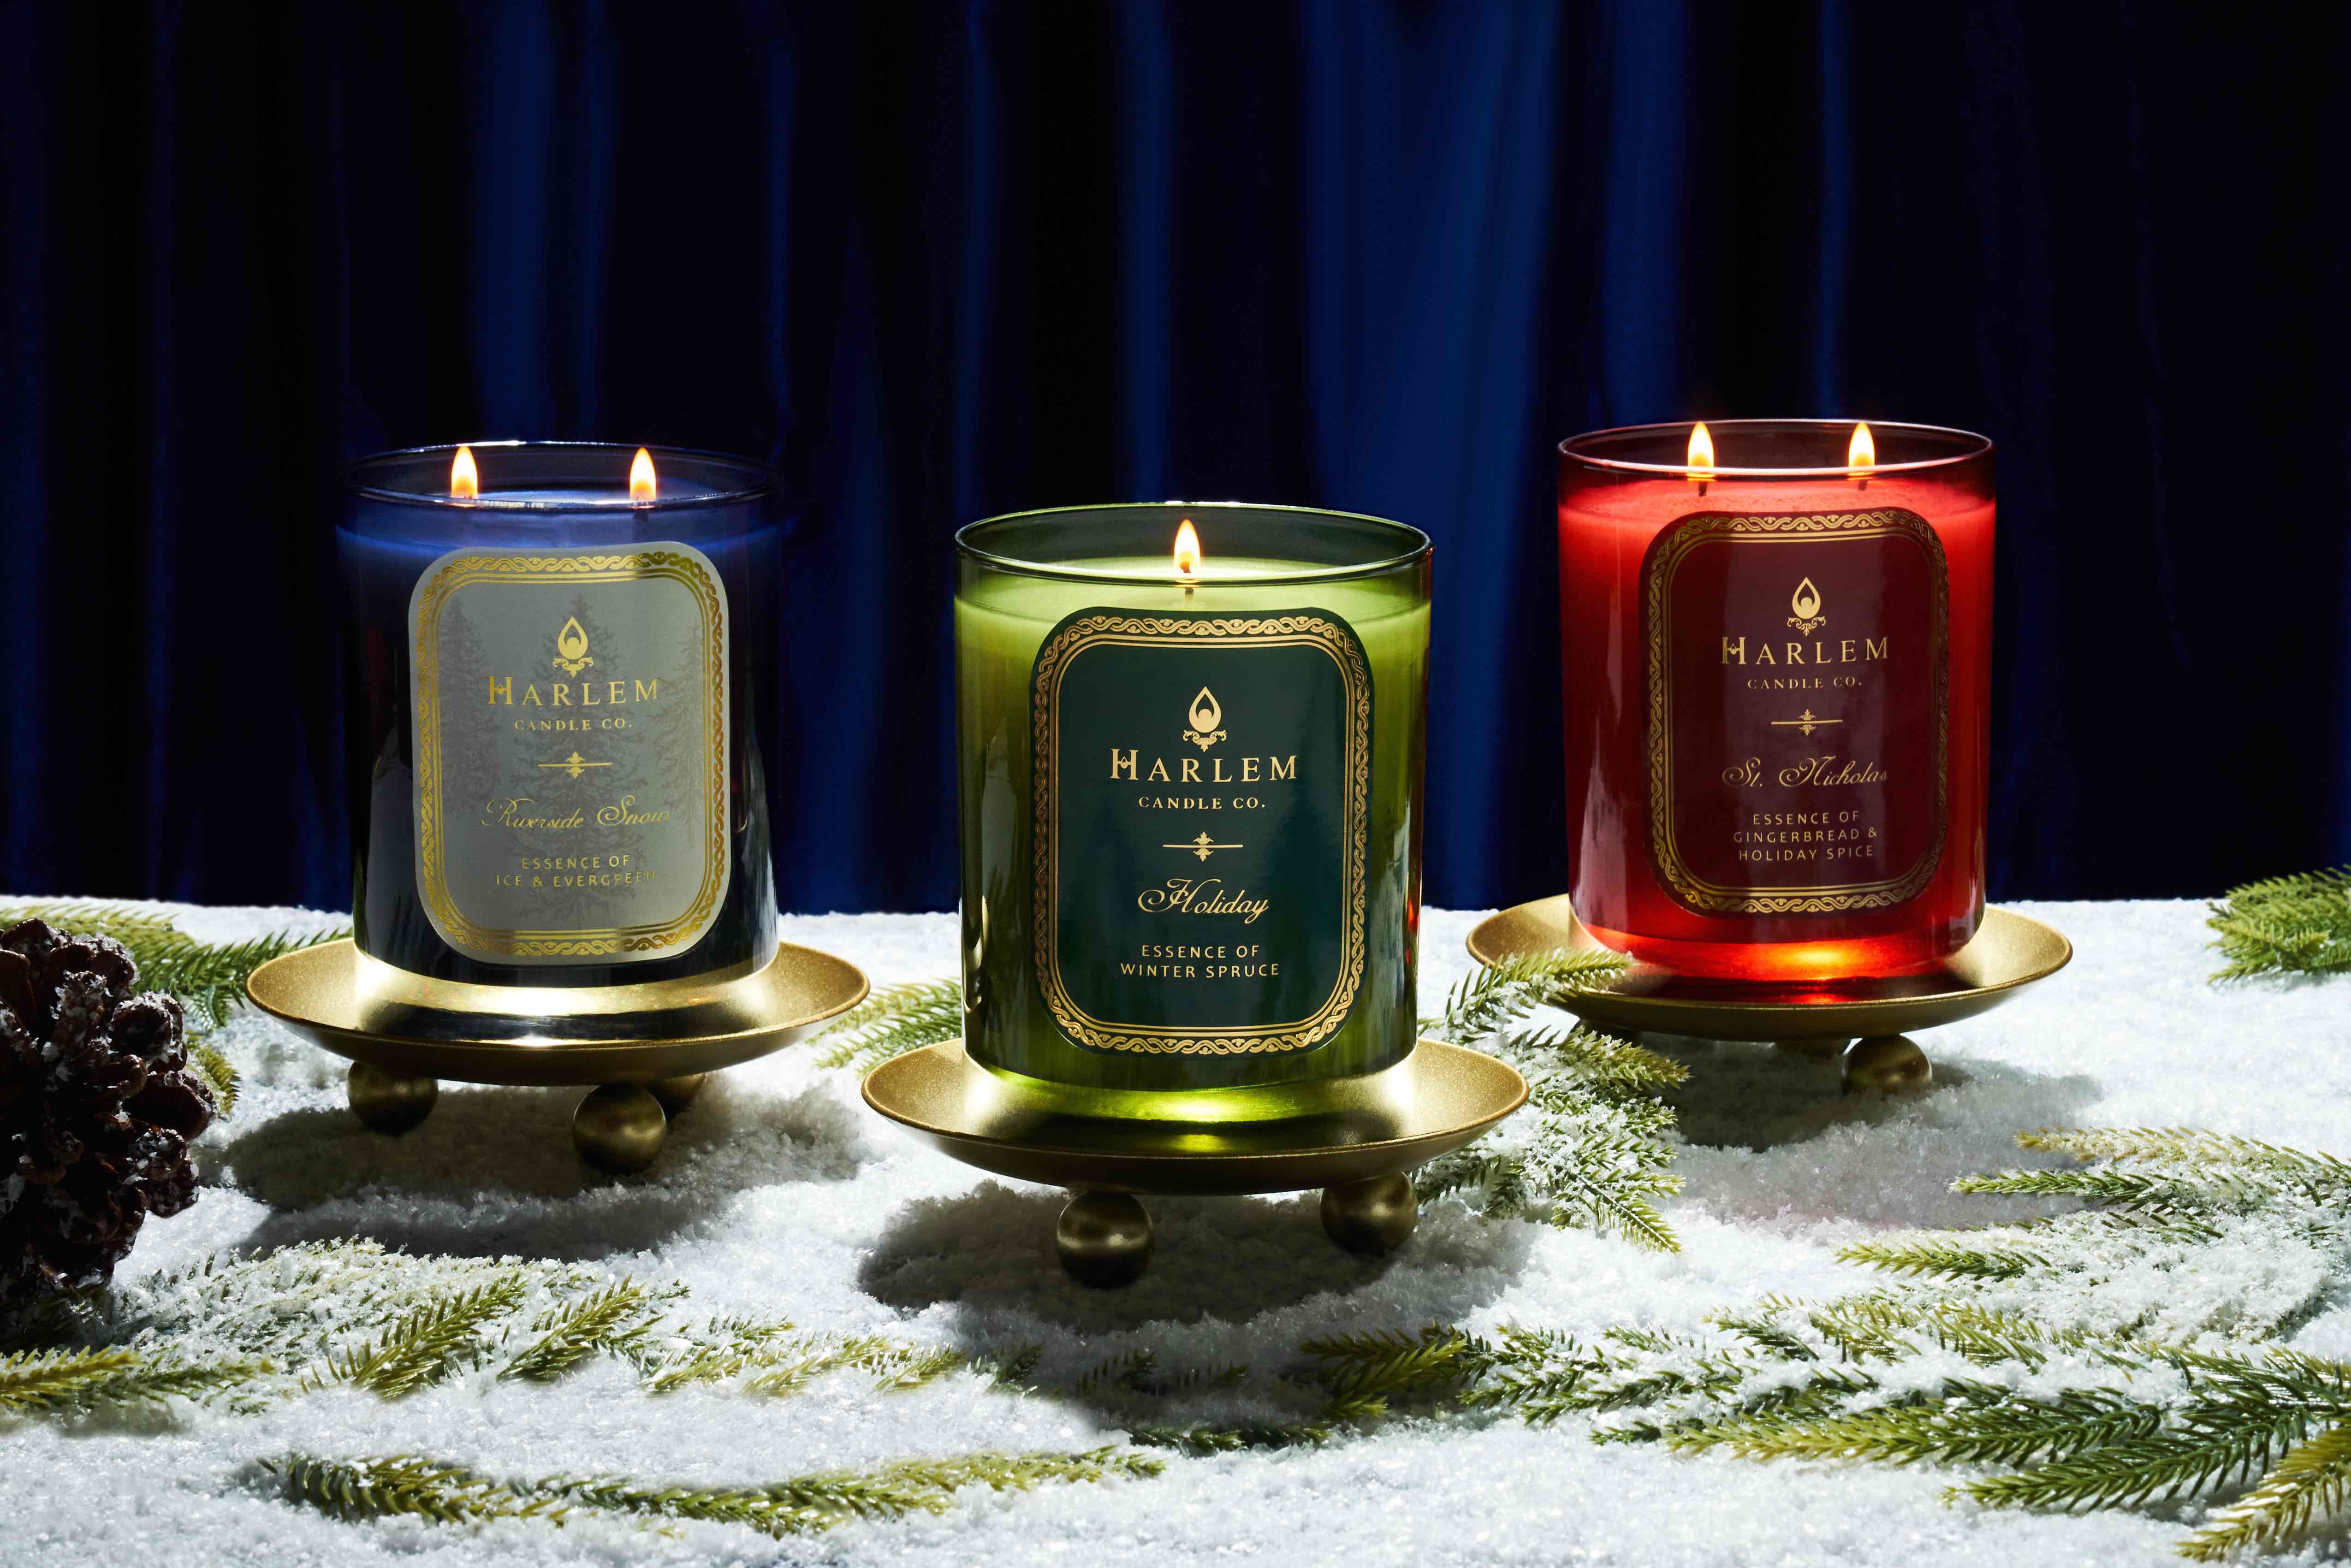 This is an image of our blue and white riverside snow to Wick candle, green Holiday, one wick candle, and our red Saint Nicolas two wick Candles.  These are pictured with a blue velvet curtain in the background with snow and pine leaves in the foreground.